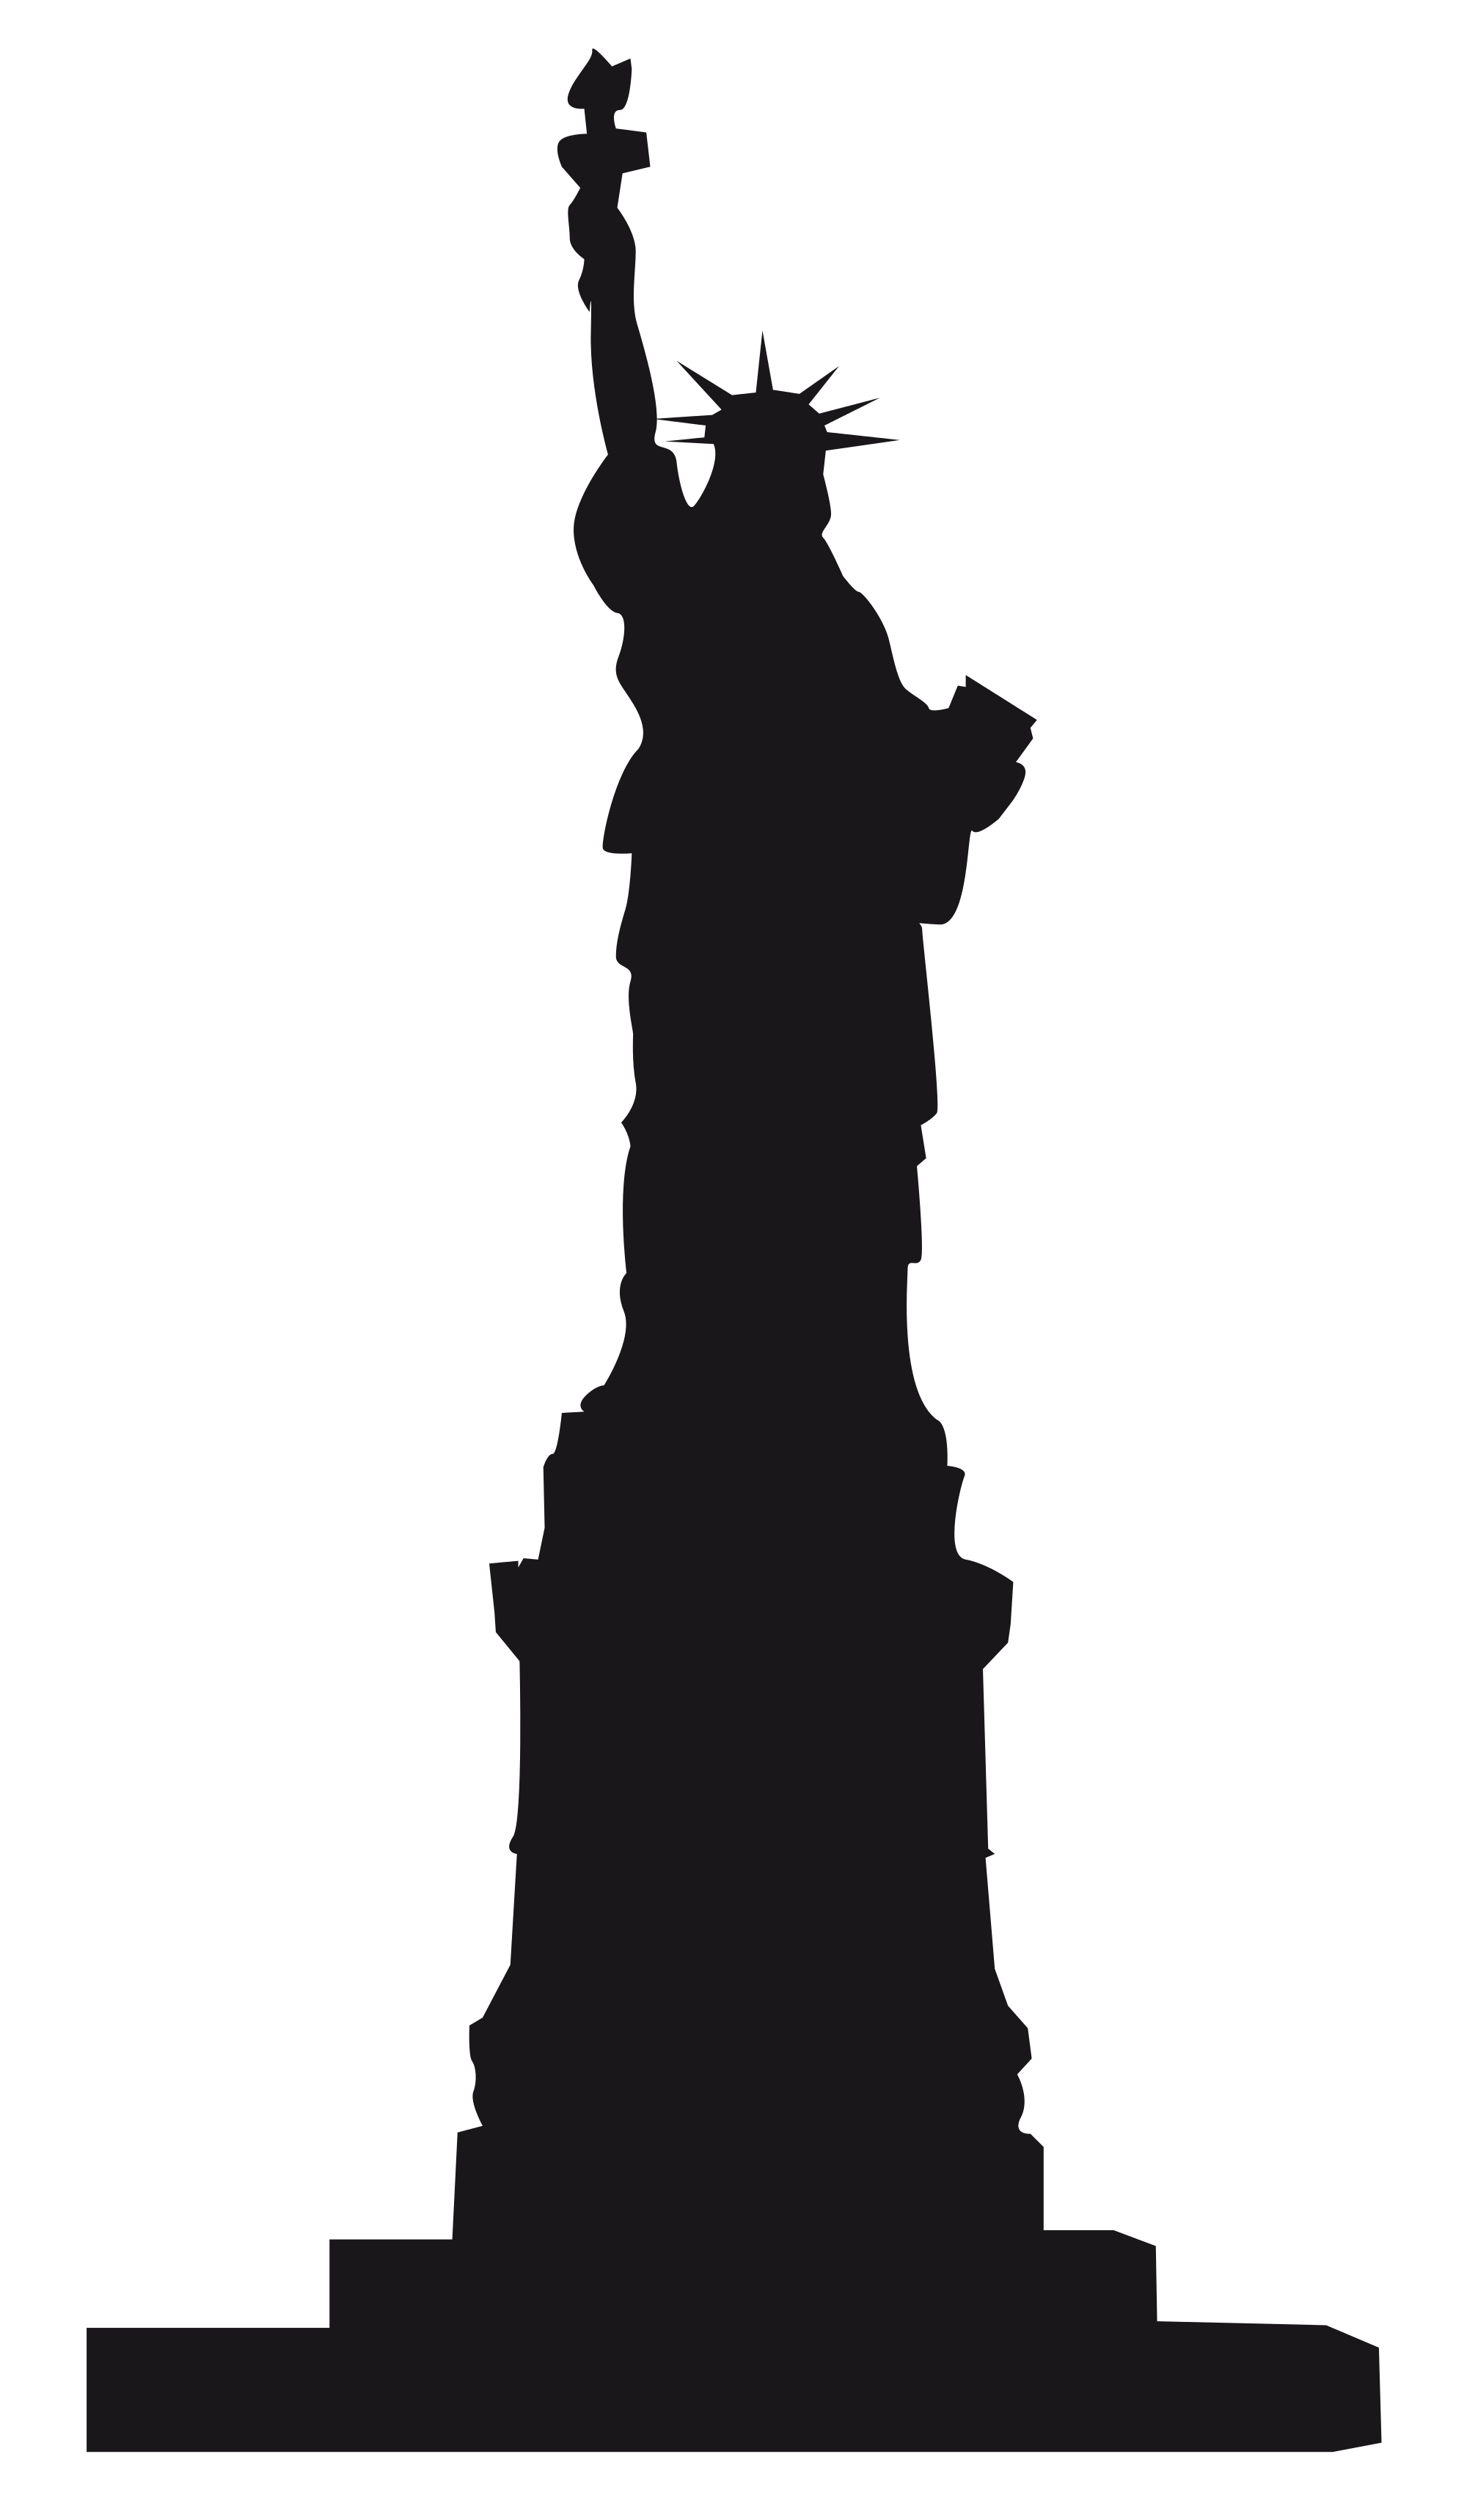 File:Silhouette of the Statue of Liberty in New York.svg 